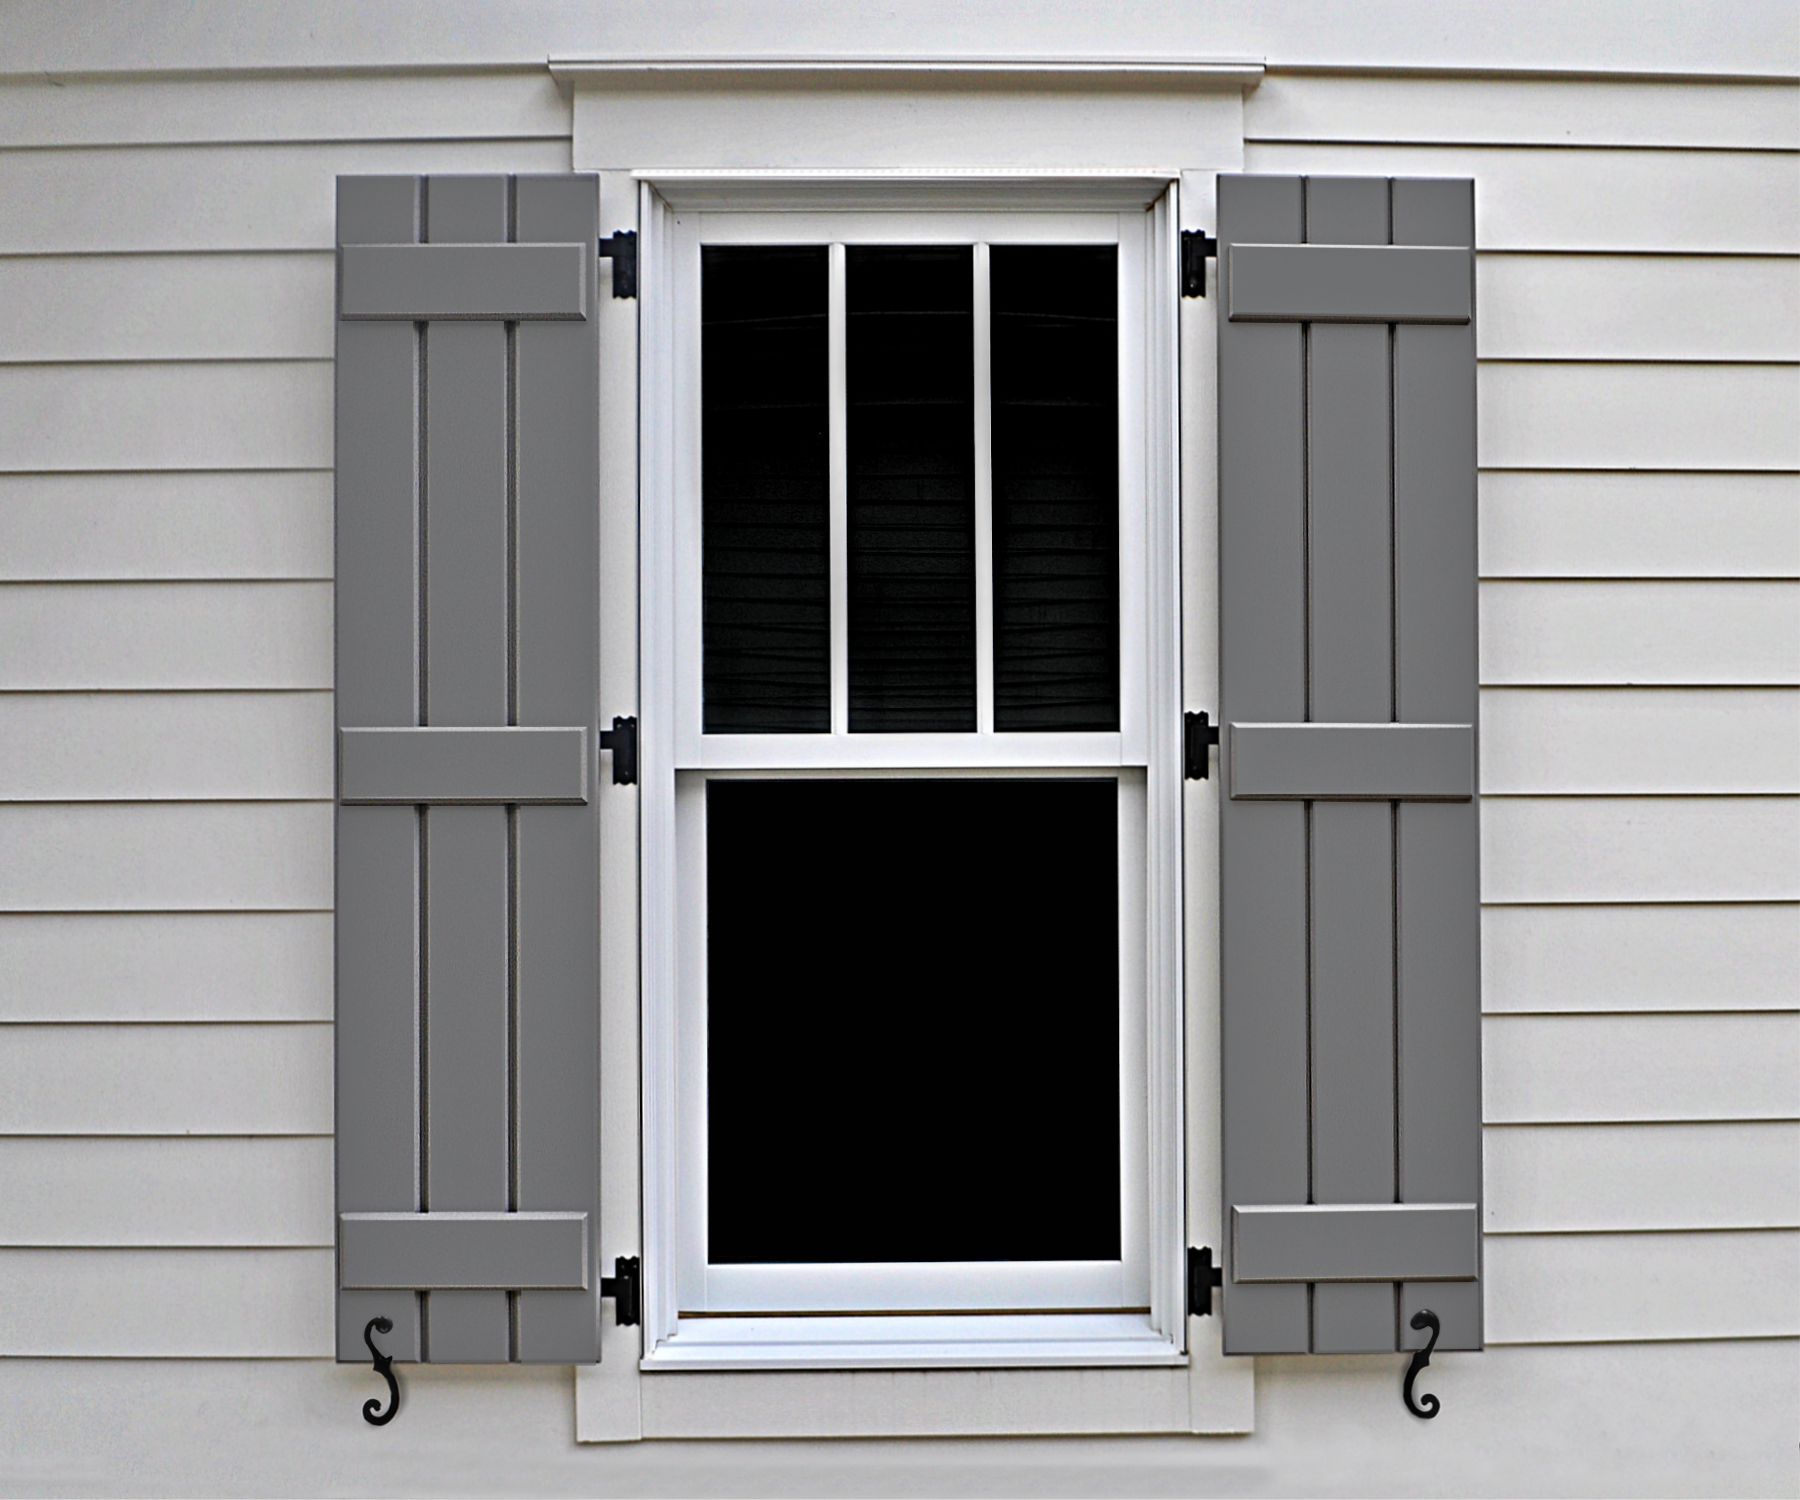 Dominion Custom Shutters are great additions to the exterior of your home or business.